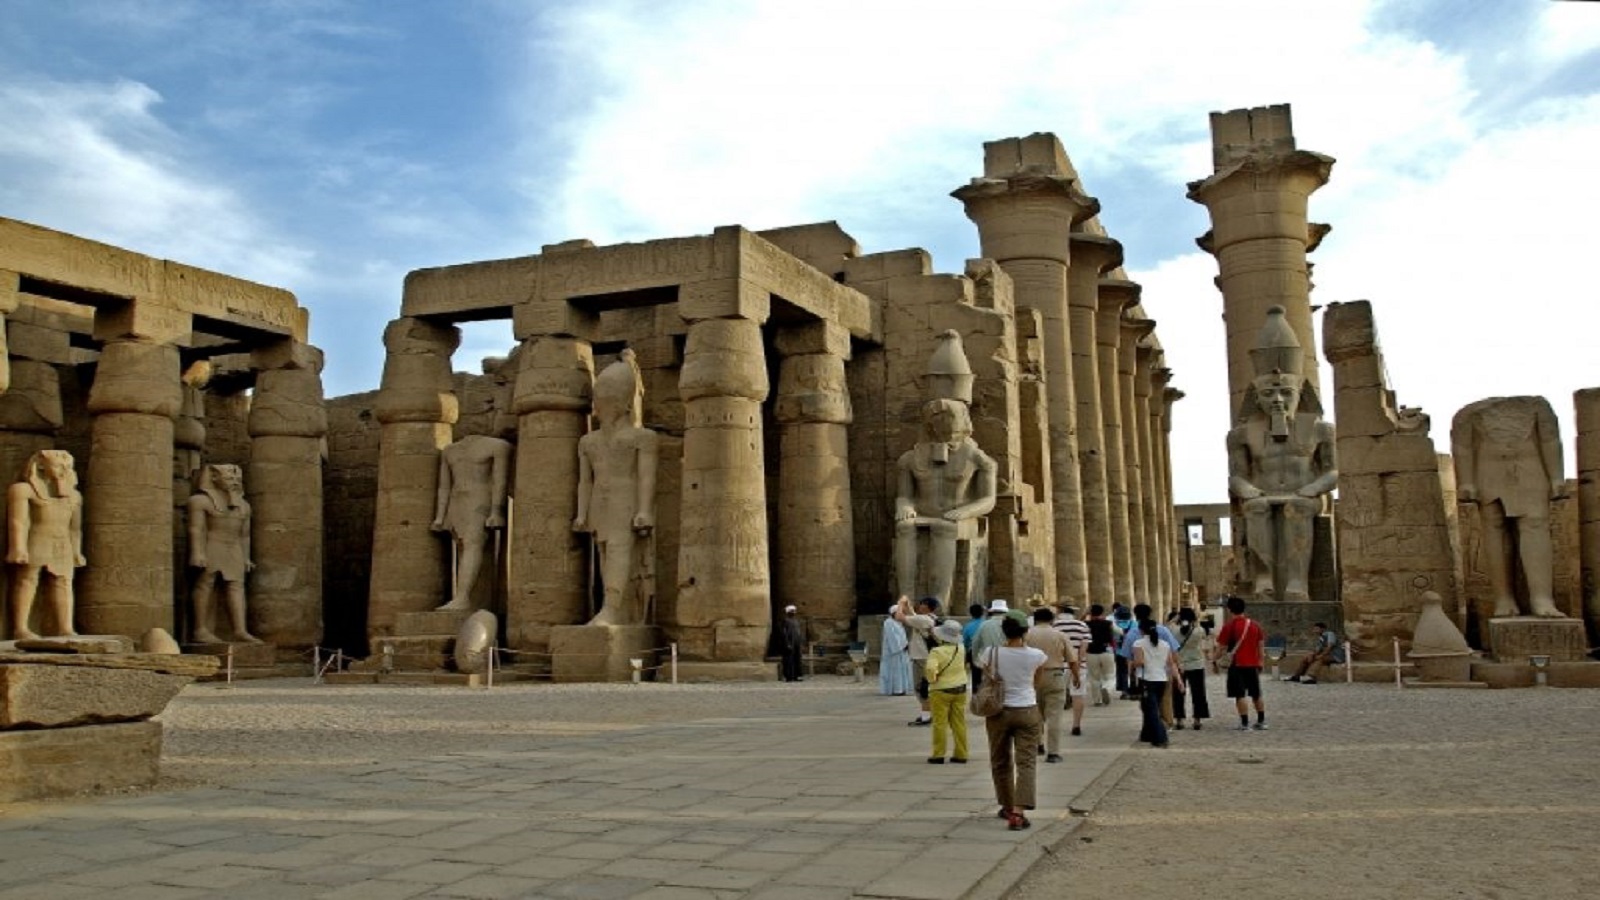 TWO DAY GUIDED TRIP TO LUXOR 